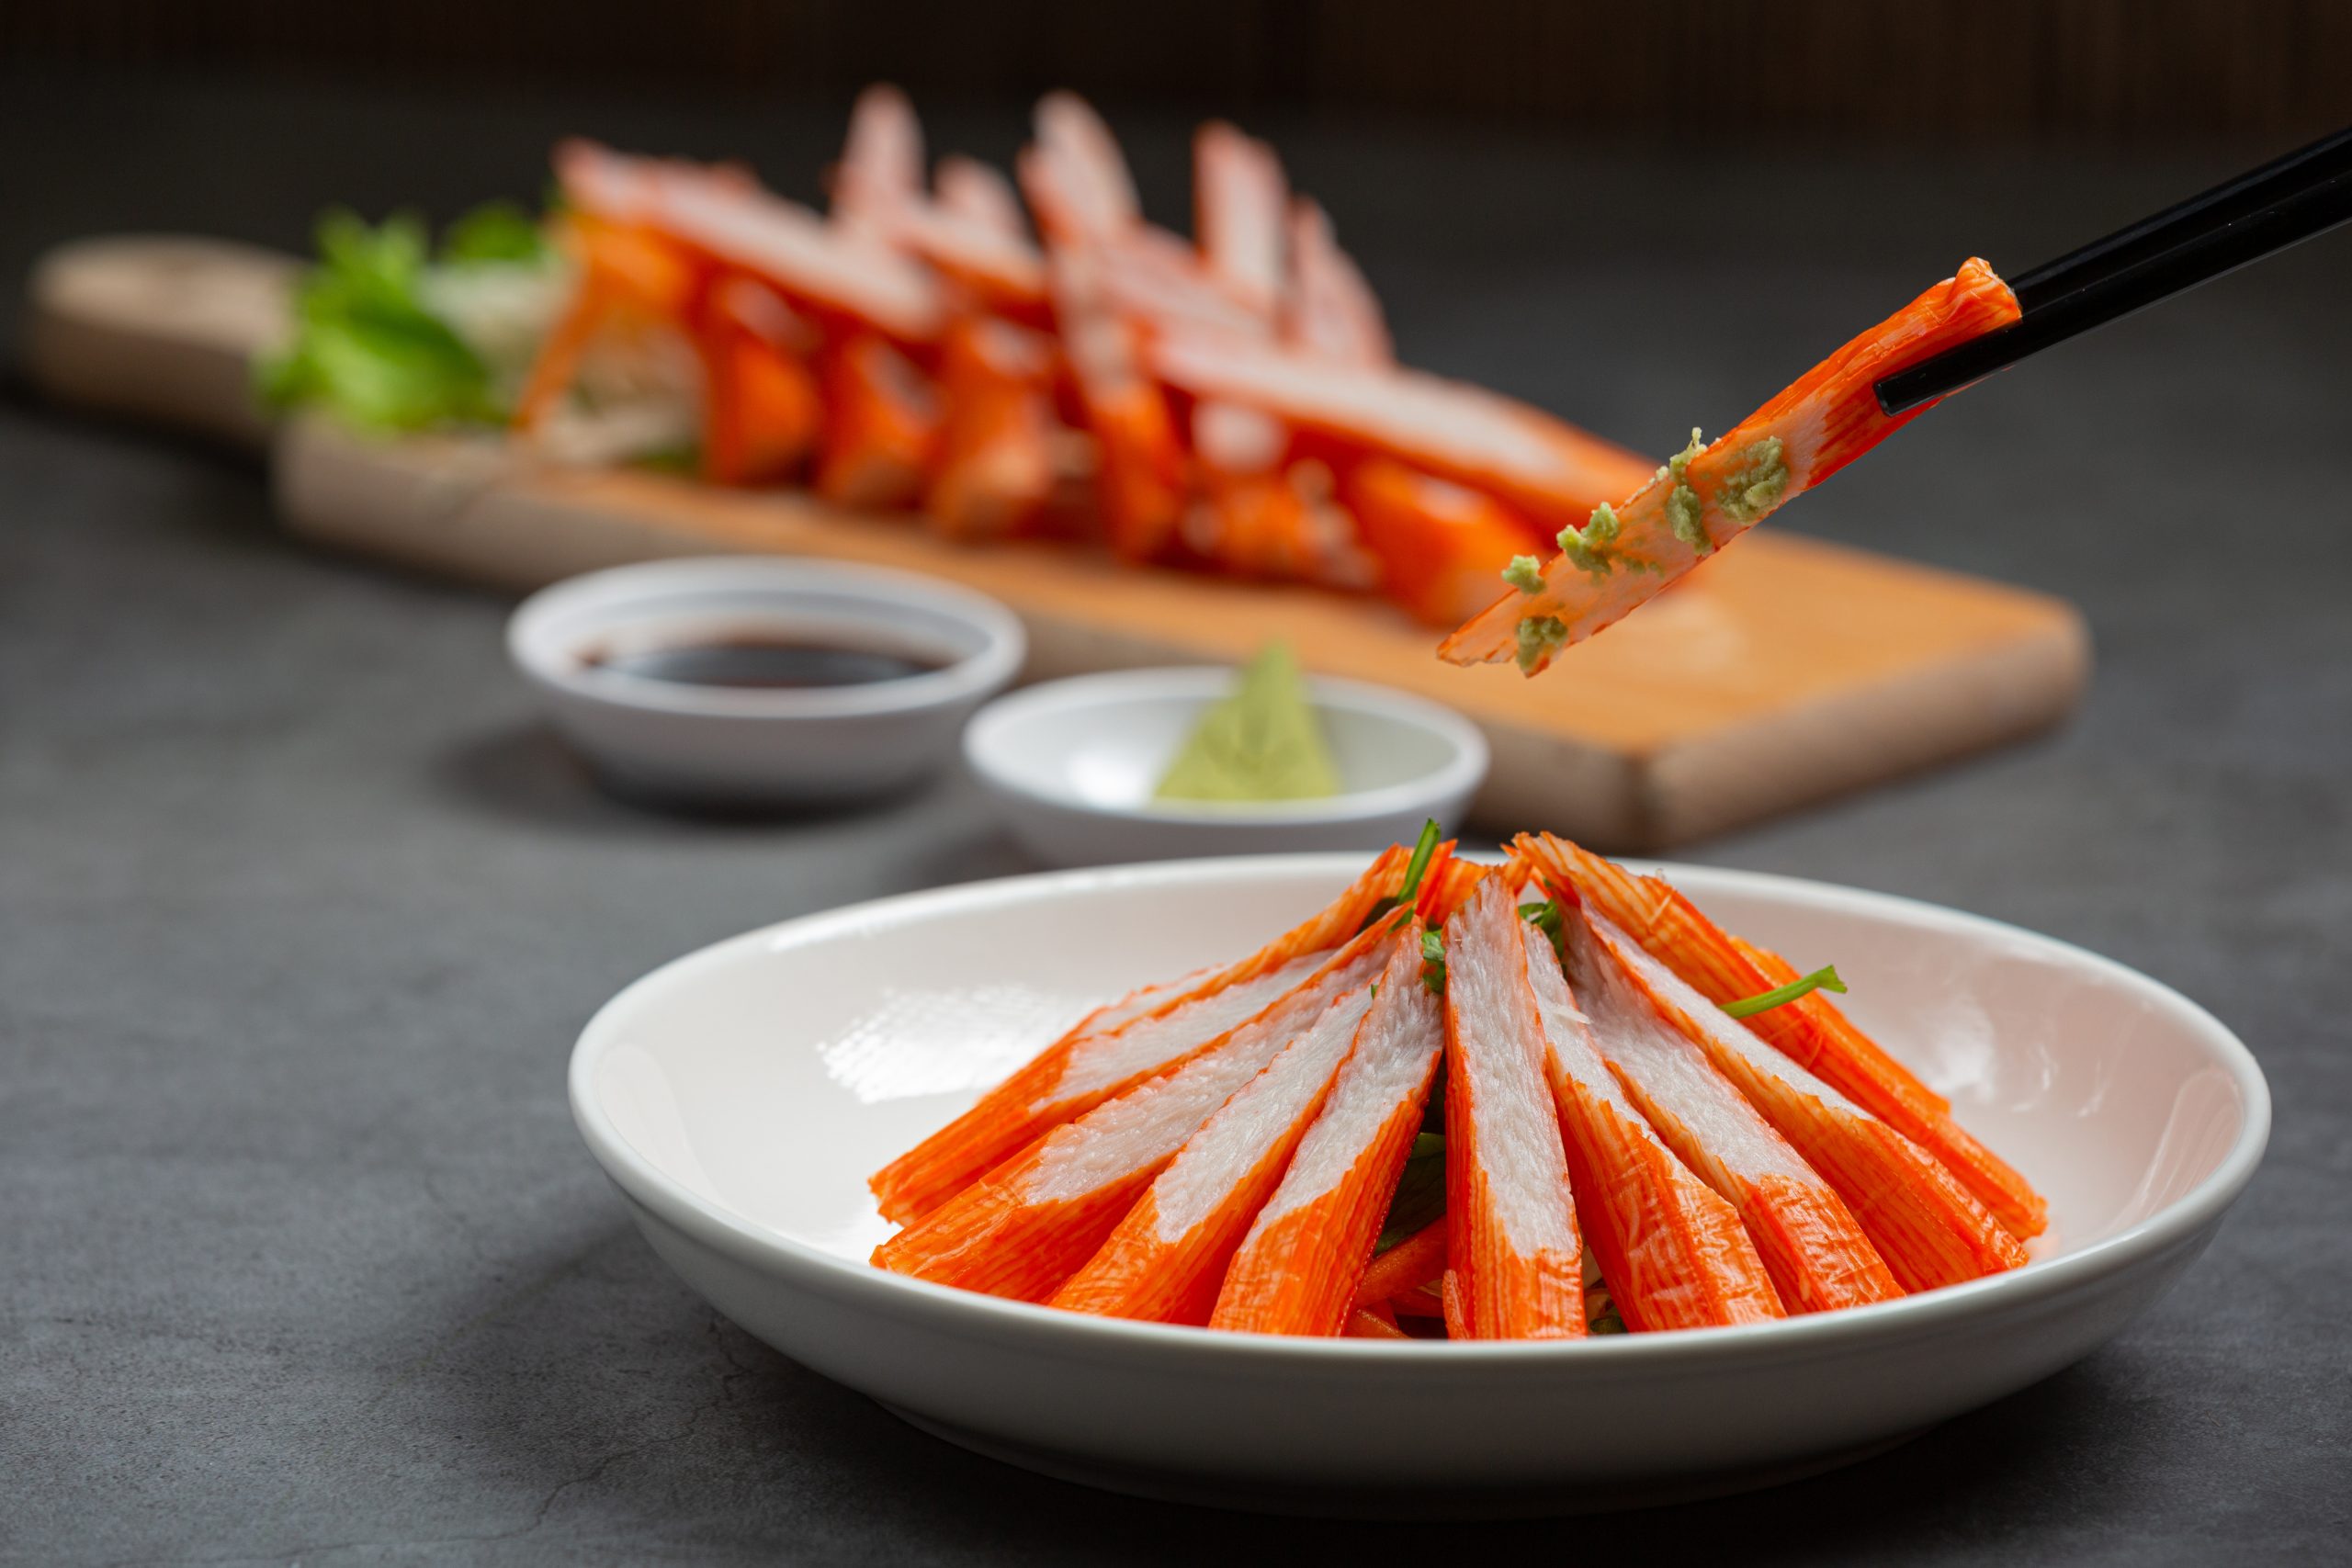 Vinh Hoan's Surimi Factory in Dong Thap to Start Operation in October - VHC